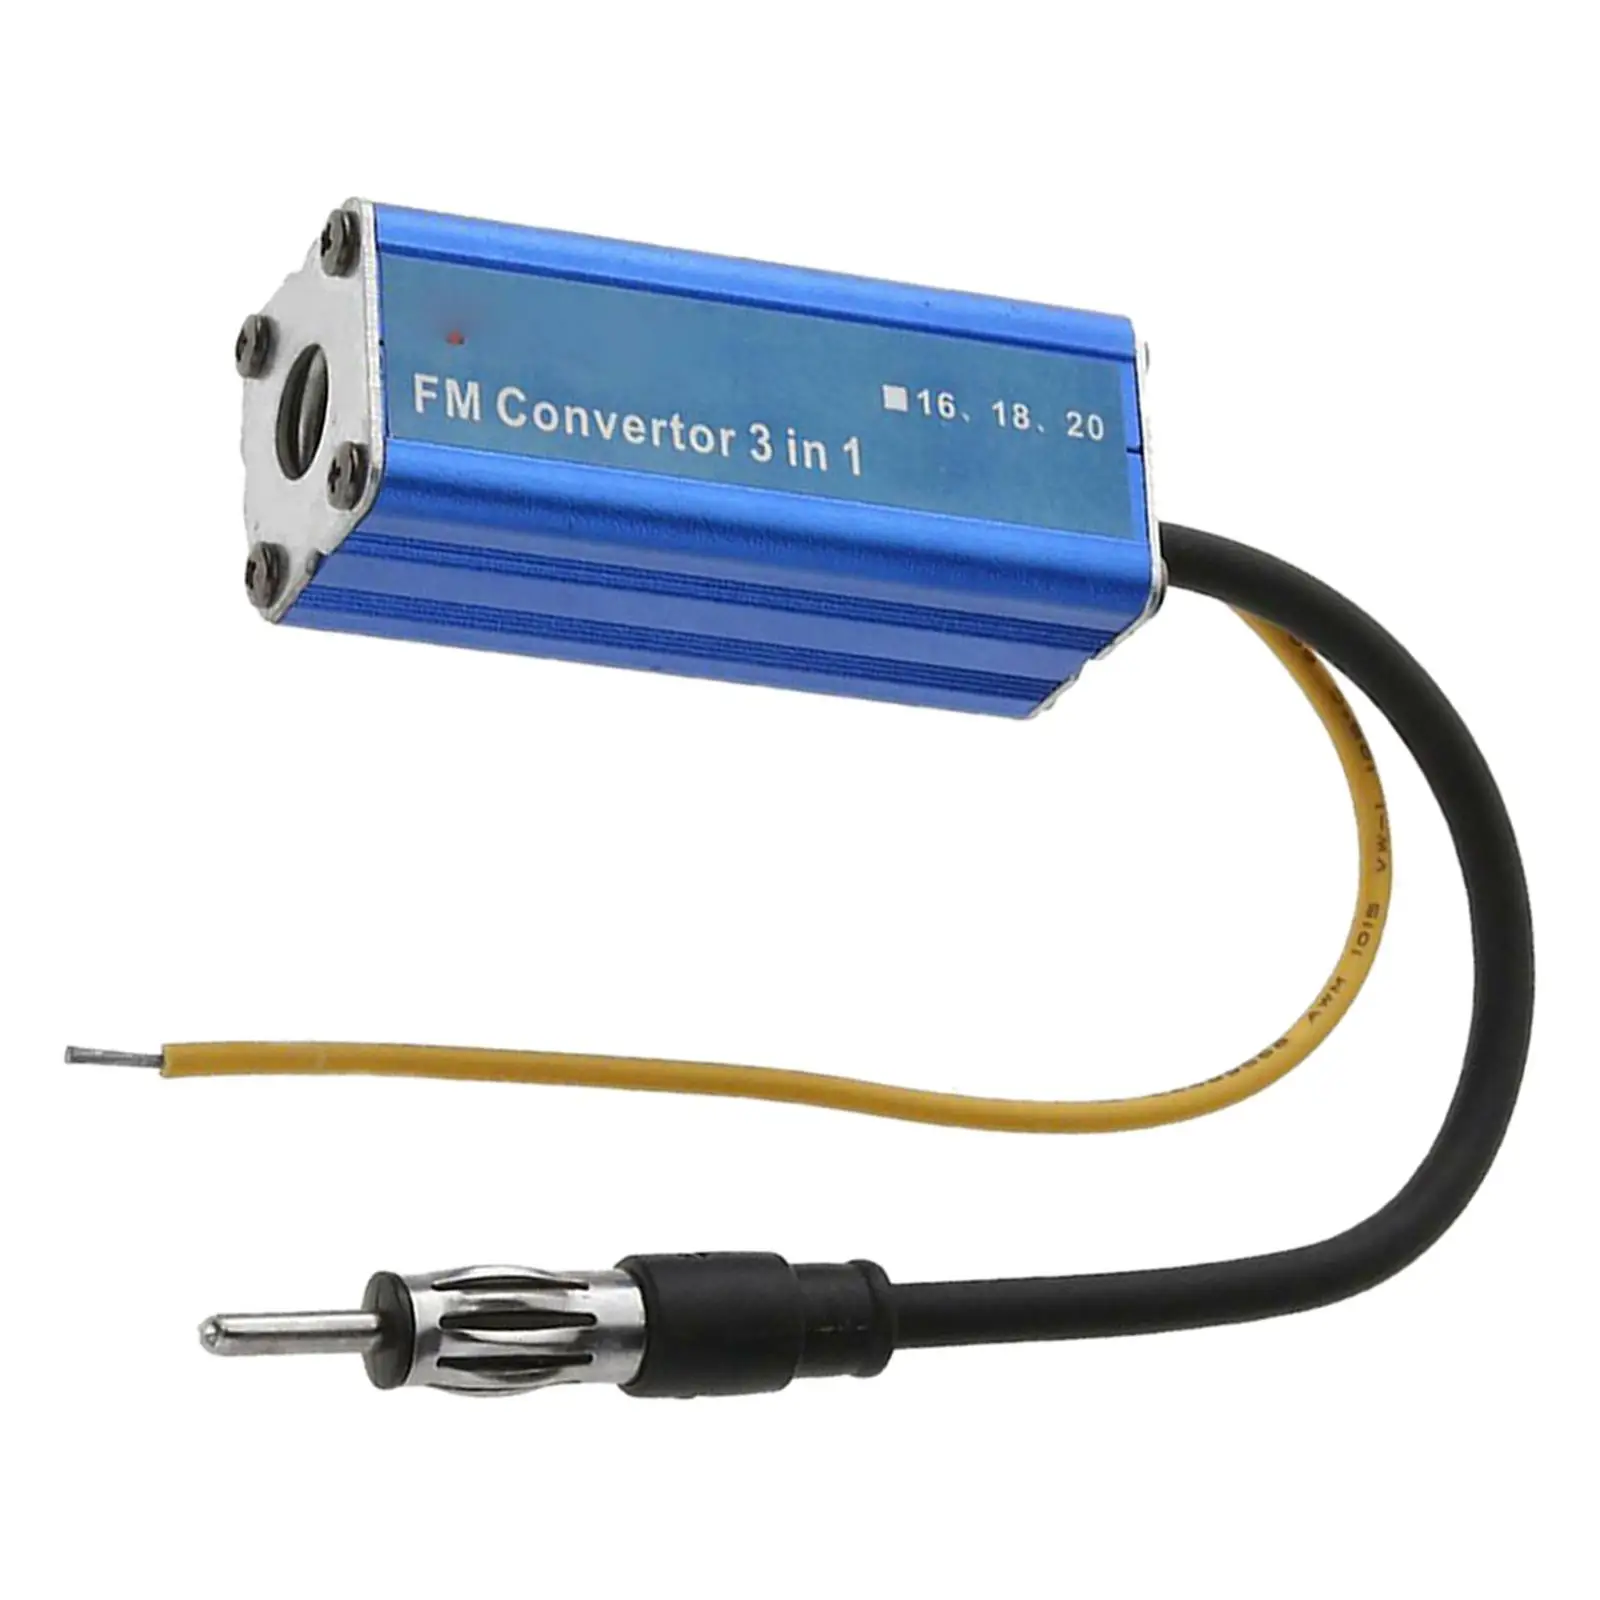 Vehicle FM Converter Band Expander Stereo for   76-90MHz for